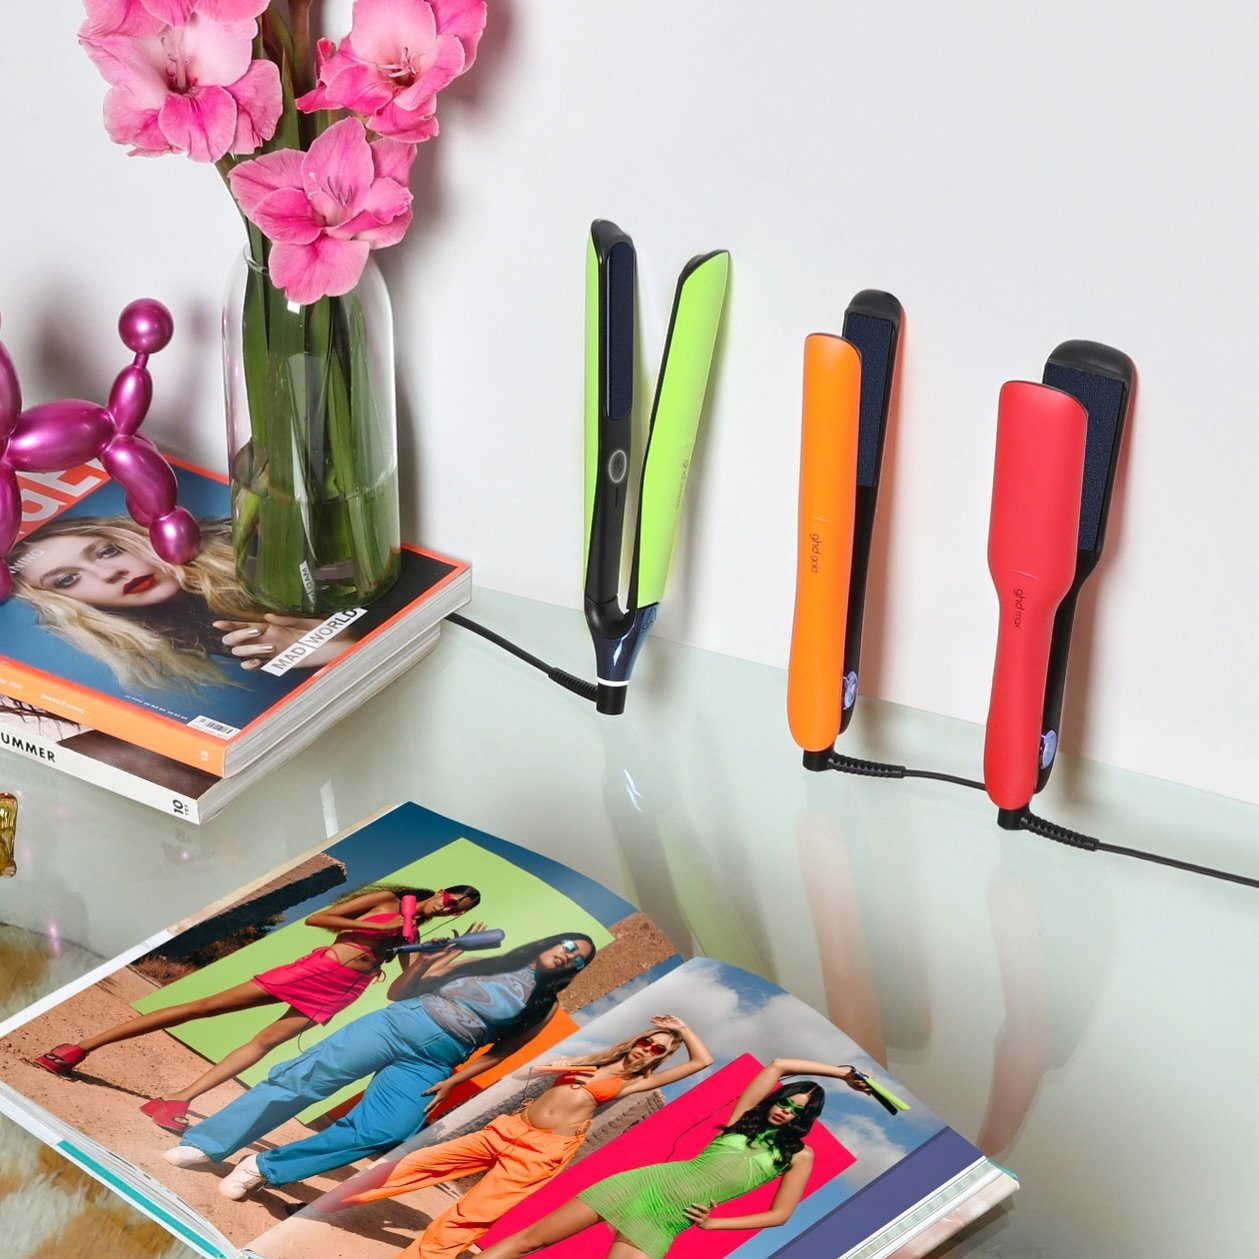 GHD COLOUR CRUSH LIMITED EDITION💚💙❤️🧡
Inspired by a vibrant colour palette, GHD is offering a limited edition range of their best selling styling tools.
💚Helios Hair Dryer &amp; Chronos Straightener
💙Duet Hot Air Style
❤️Max Wide Straightener
🧡